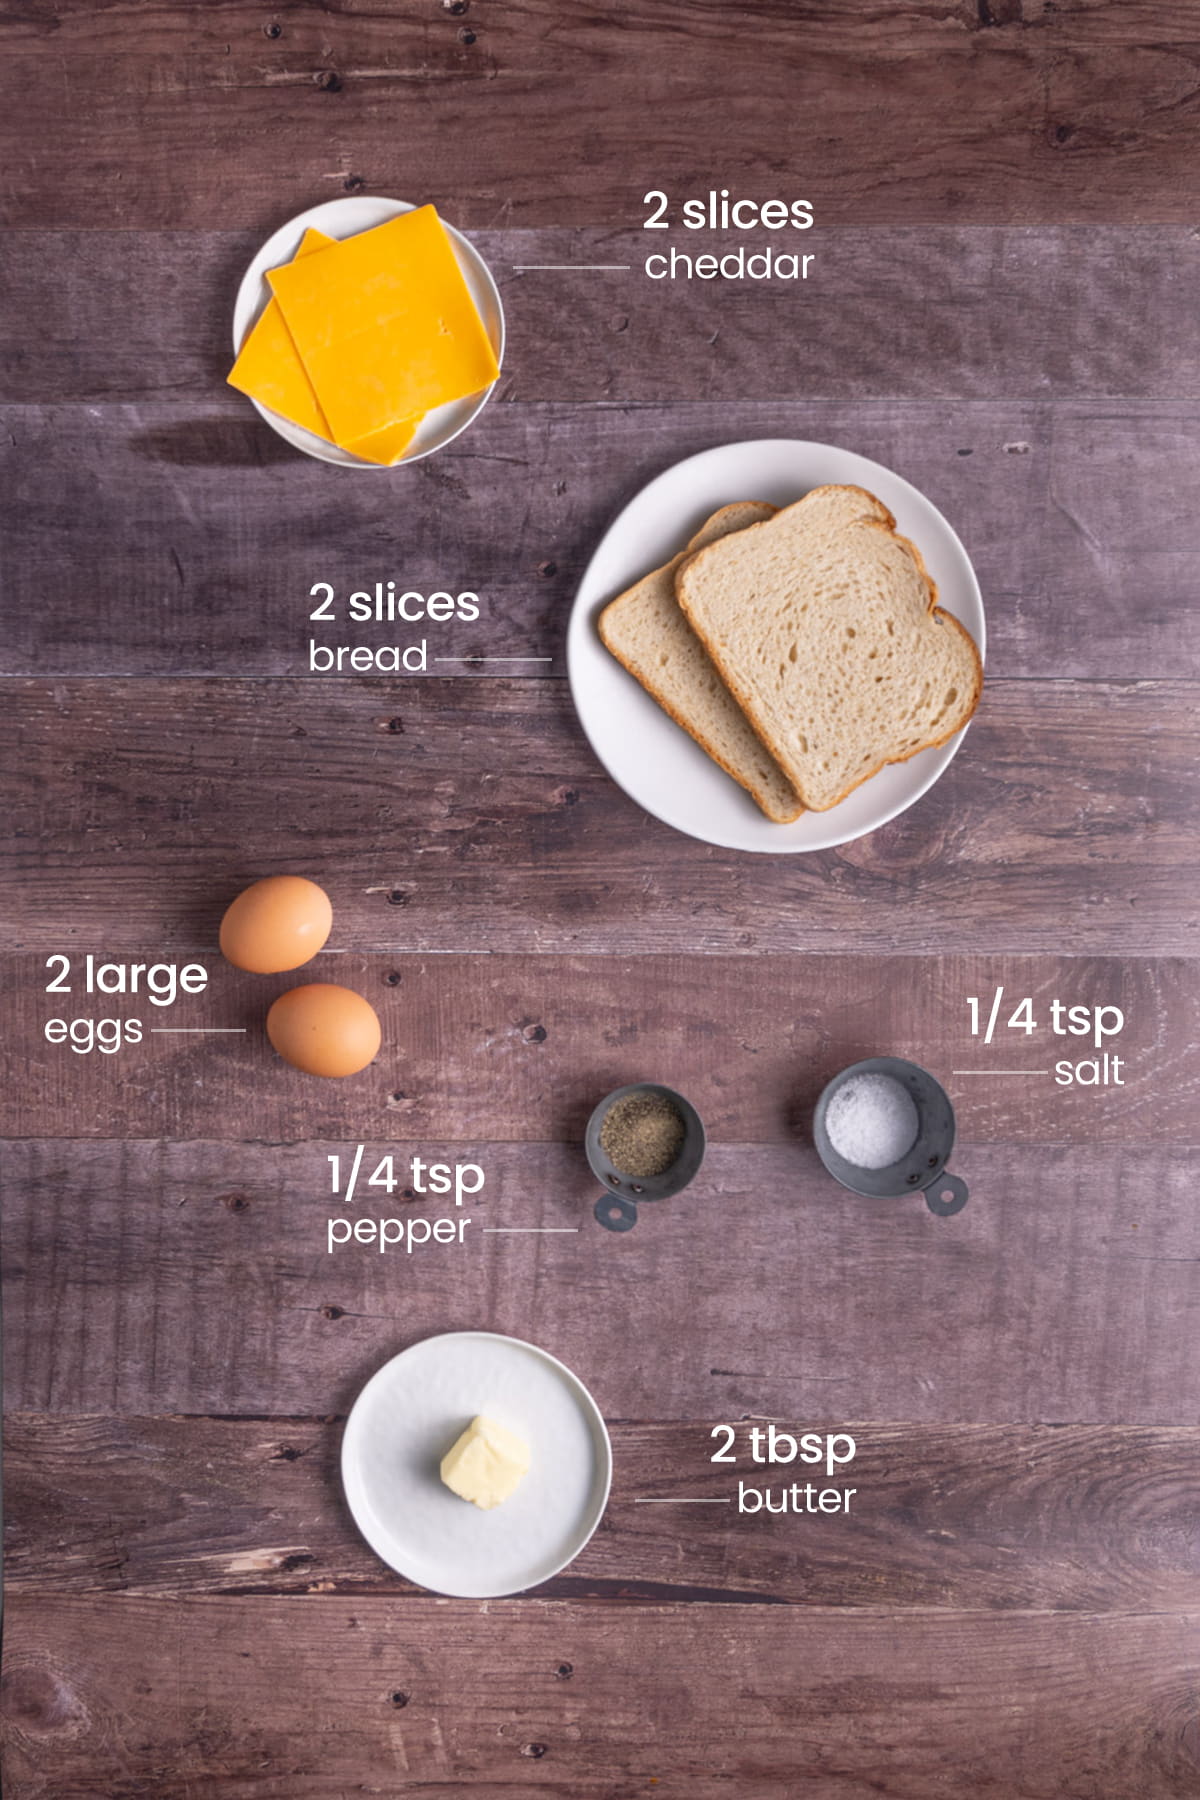 all ingredients for scrambled egg and cheese sandwich - cheddar cheese, bread, eggs, pepper, salt, butter